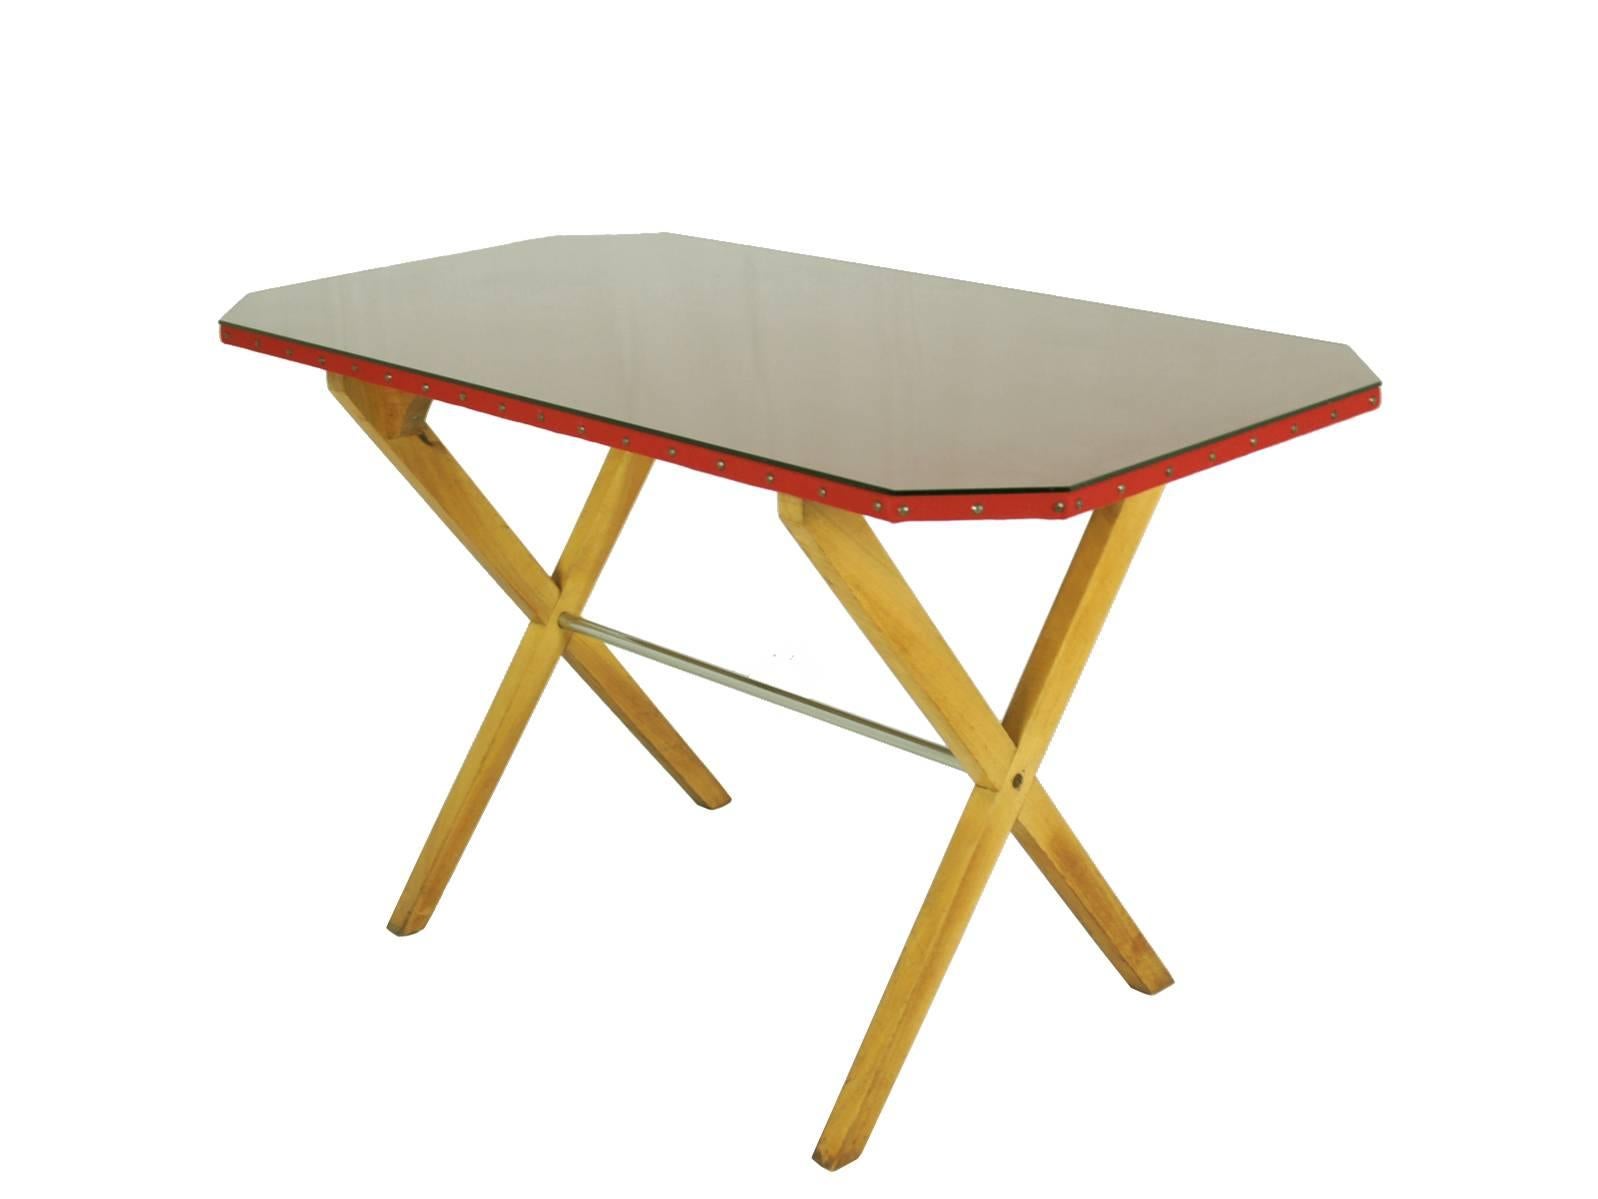 A beautiful and rare desk in the style of Franco Albini. It is made from a wooden crossed structure with a chrome-plated rod. A studded octagonal top is covered with red 